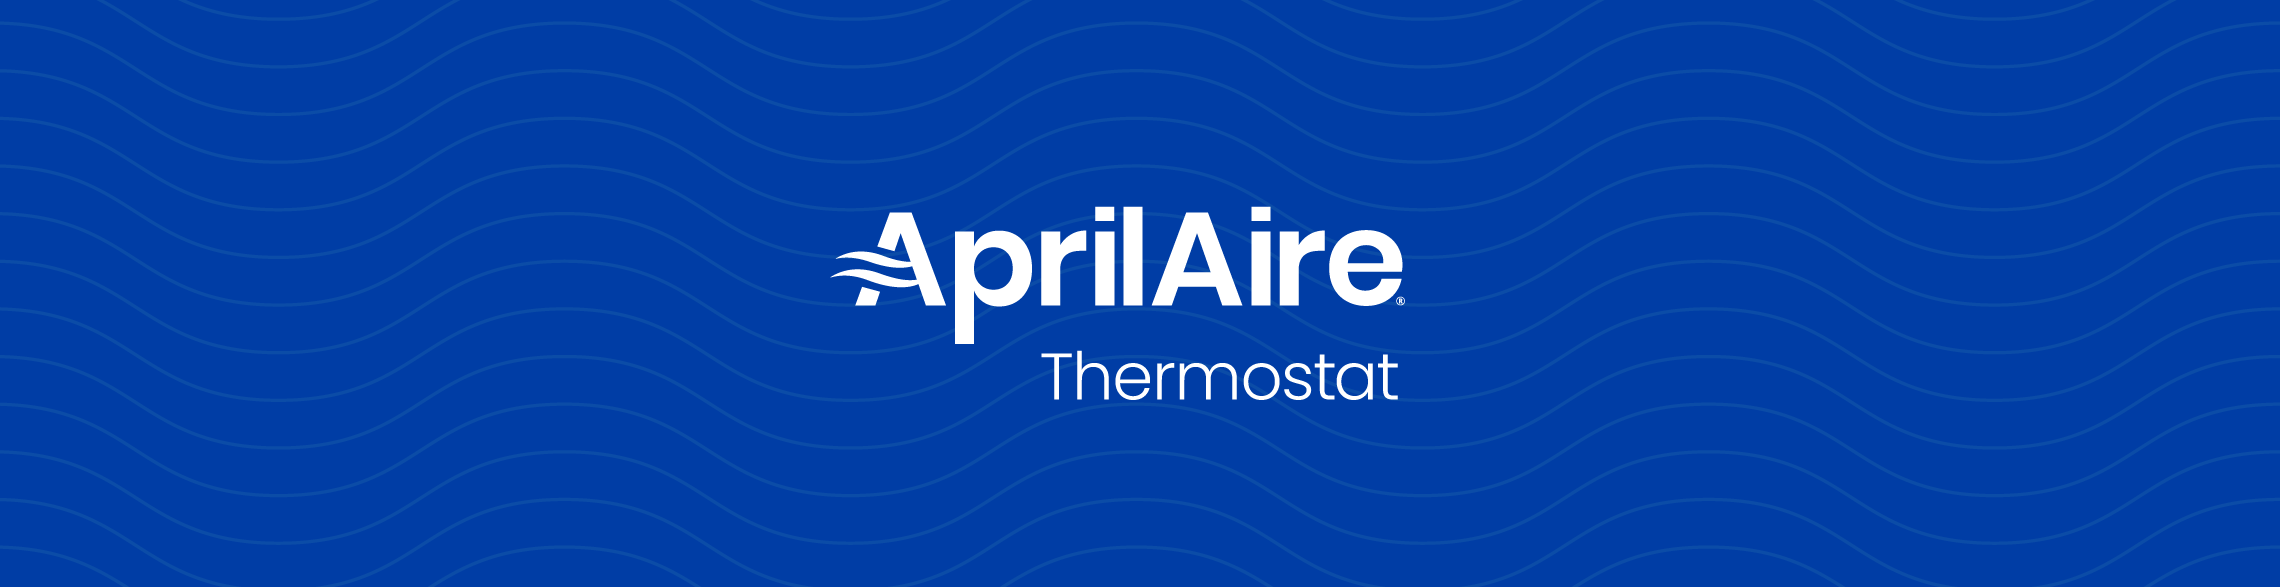 AprilAire-Thermostat-Banner